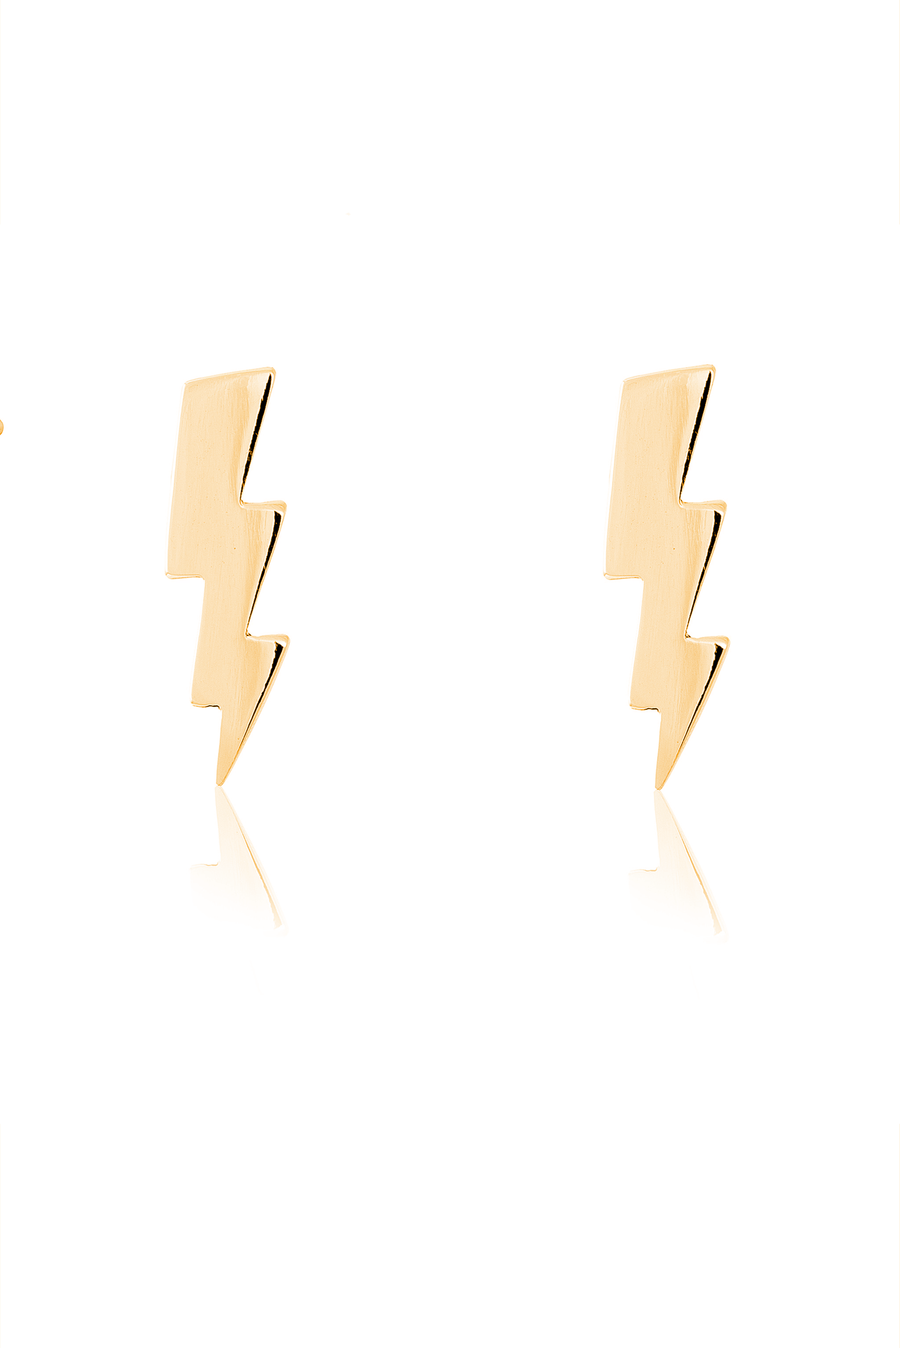 The Collective Dublin - Home to Irish Design - Cosmic Boulevard : Large 9ct Yellow Gold Lightning Bolt Earrings